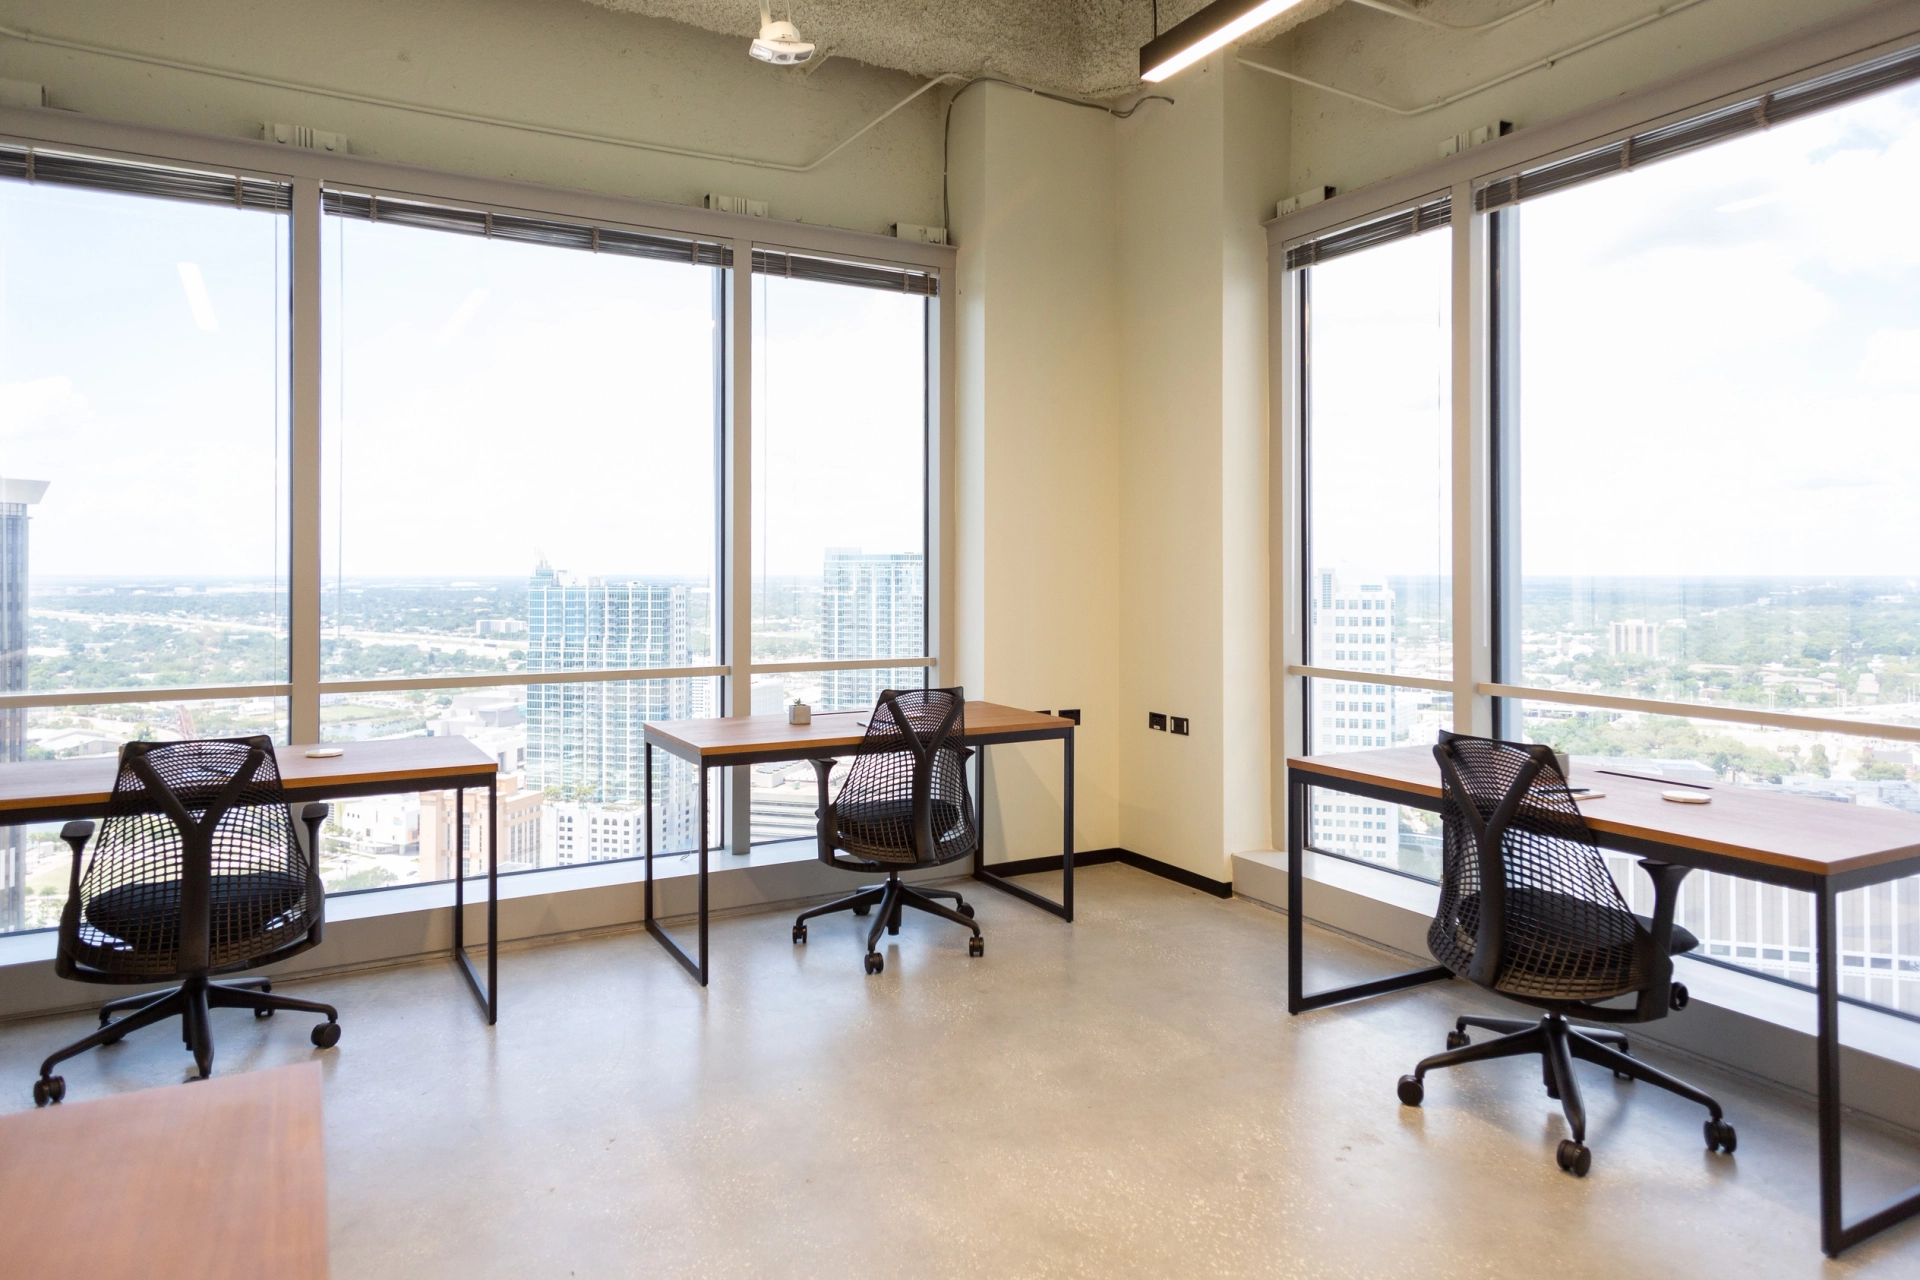 An office workspace with a view of the city.